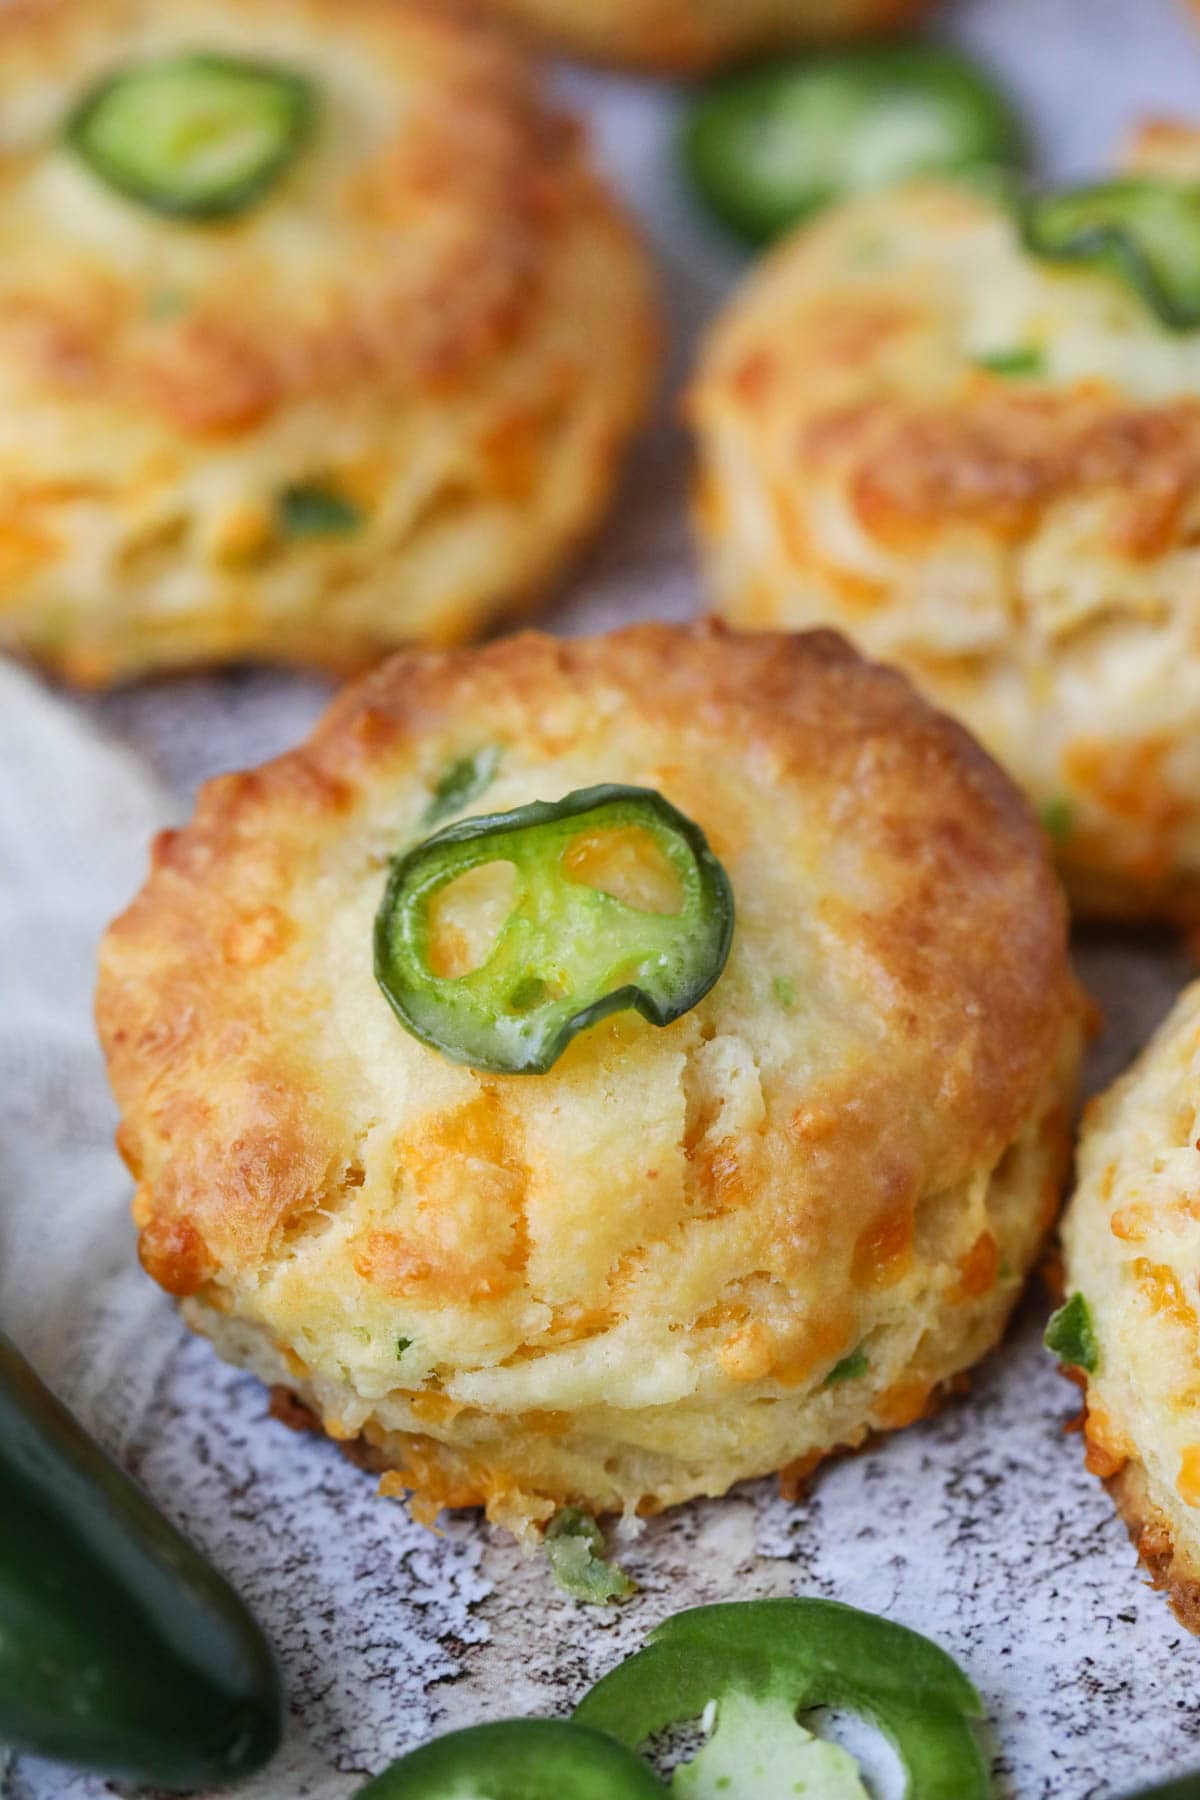 Cheddar jalapeno biscuits arranged on a white surface.